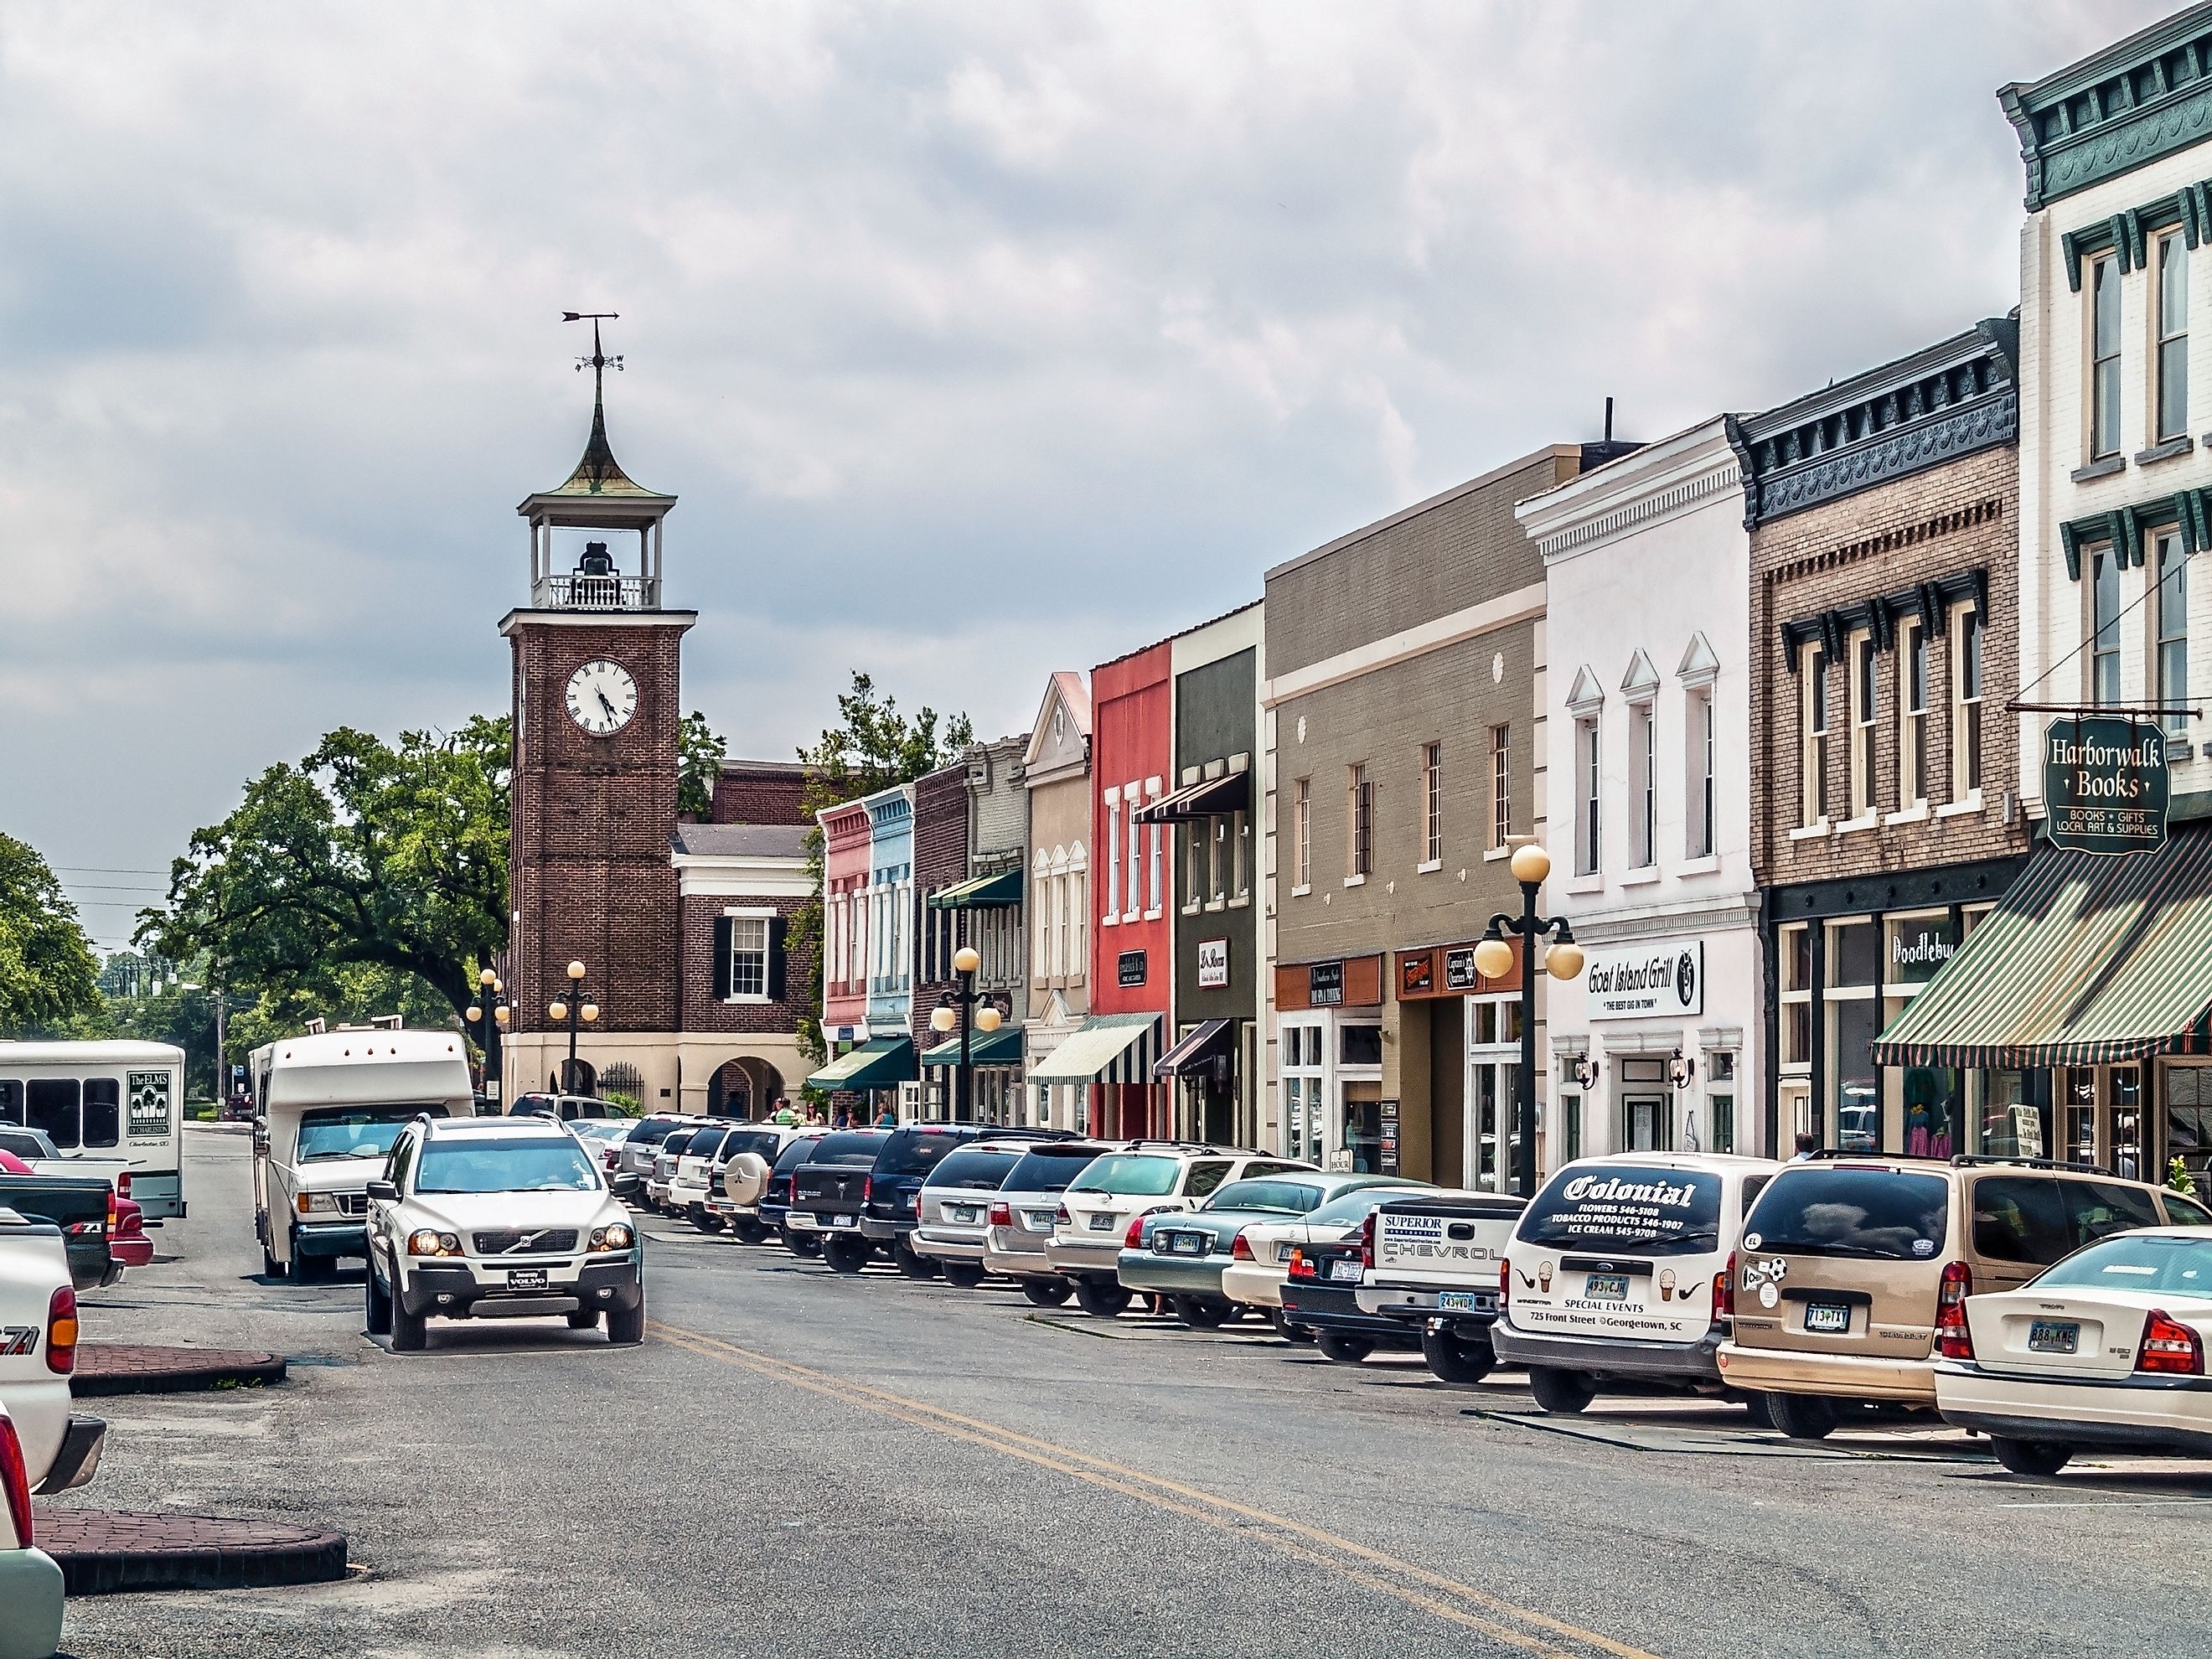 Front Street with shops and the old clock tower Georgetown, South Carolina - Andrew F. Kazmierski / Shutterstock.com